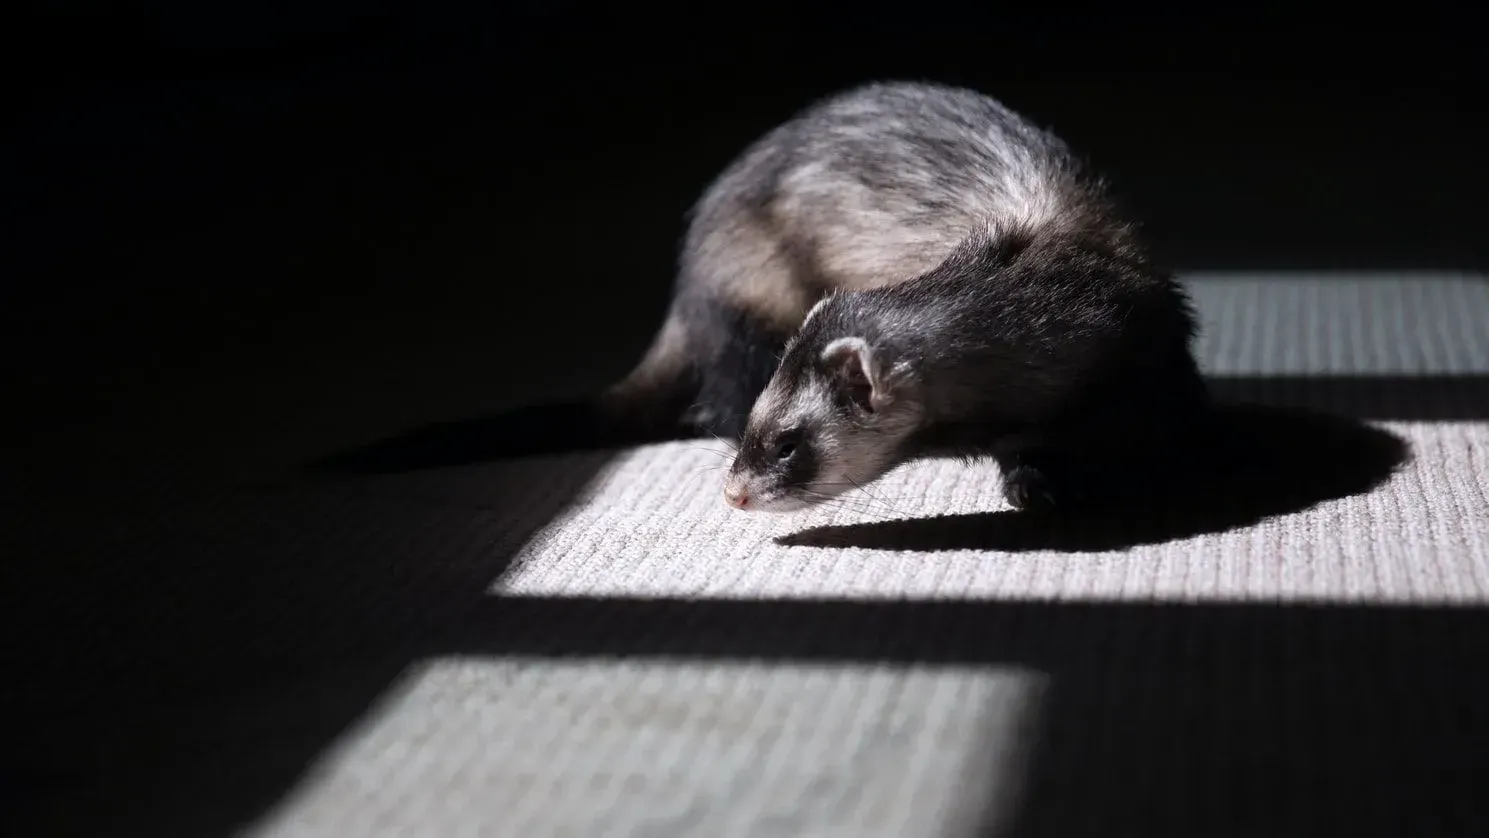 Ferrets have a similar appearance to that of a weasel or a mink.